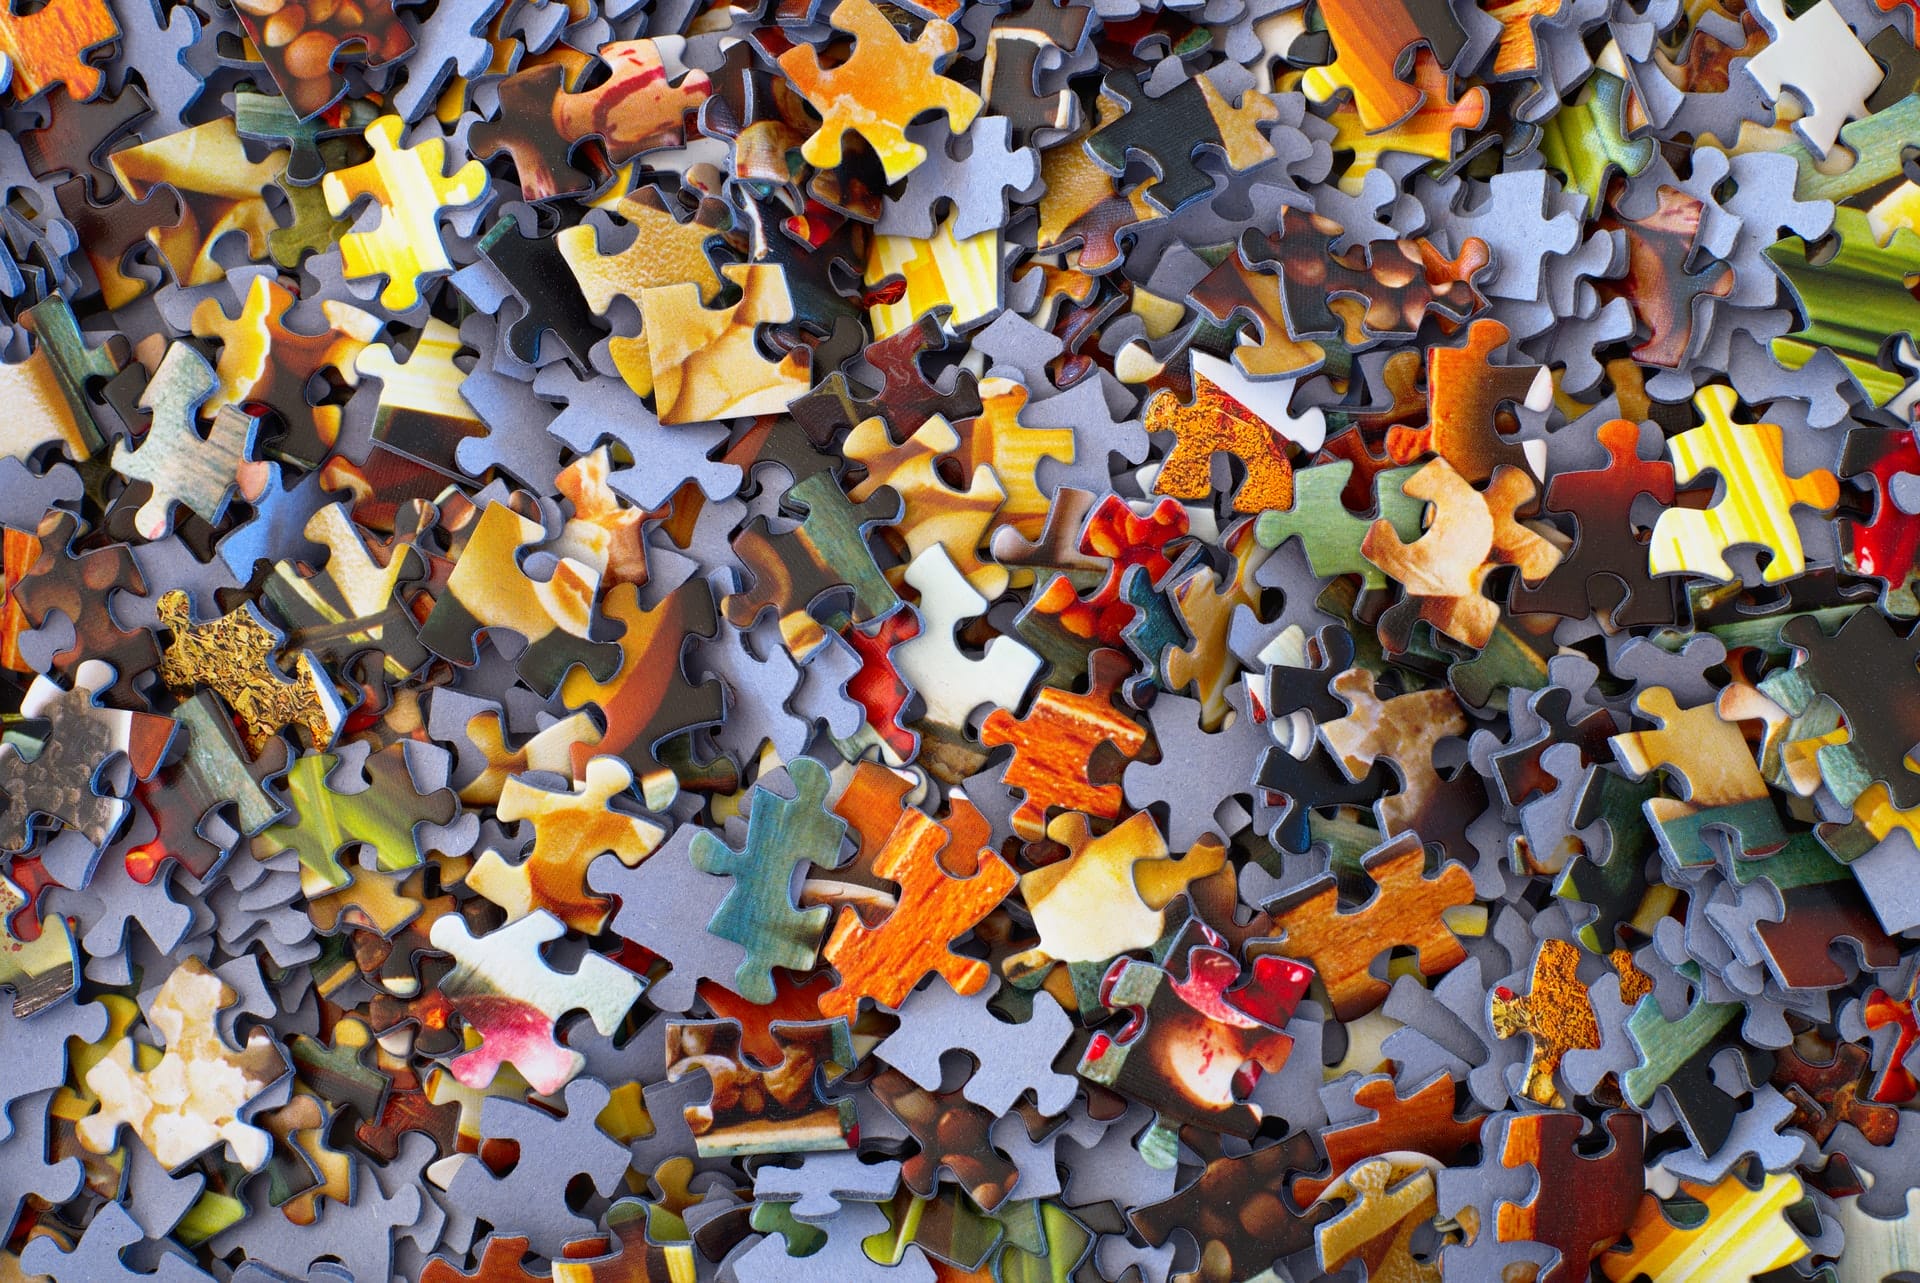 Puzzle pieces in a pile.